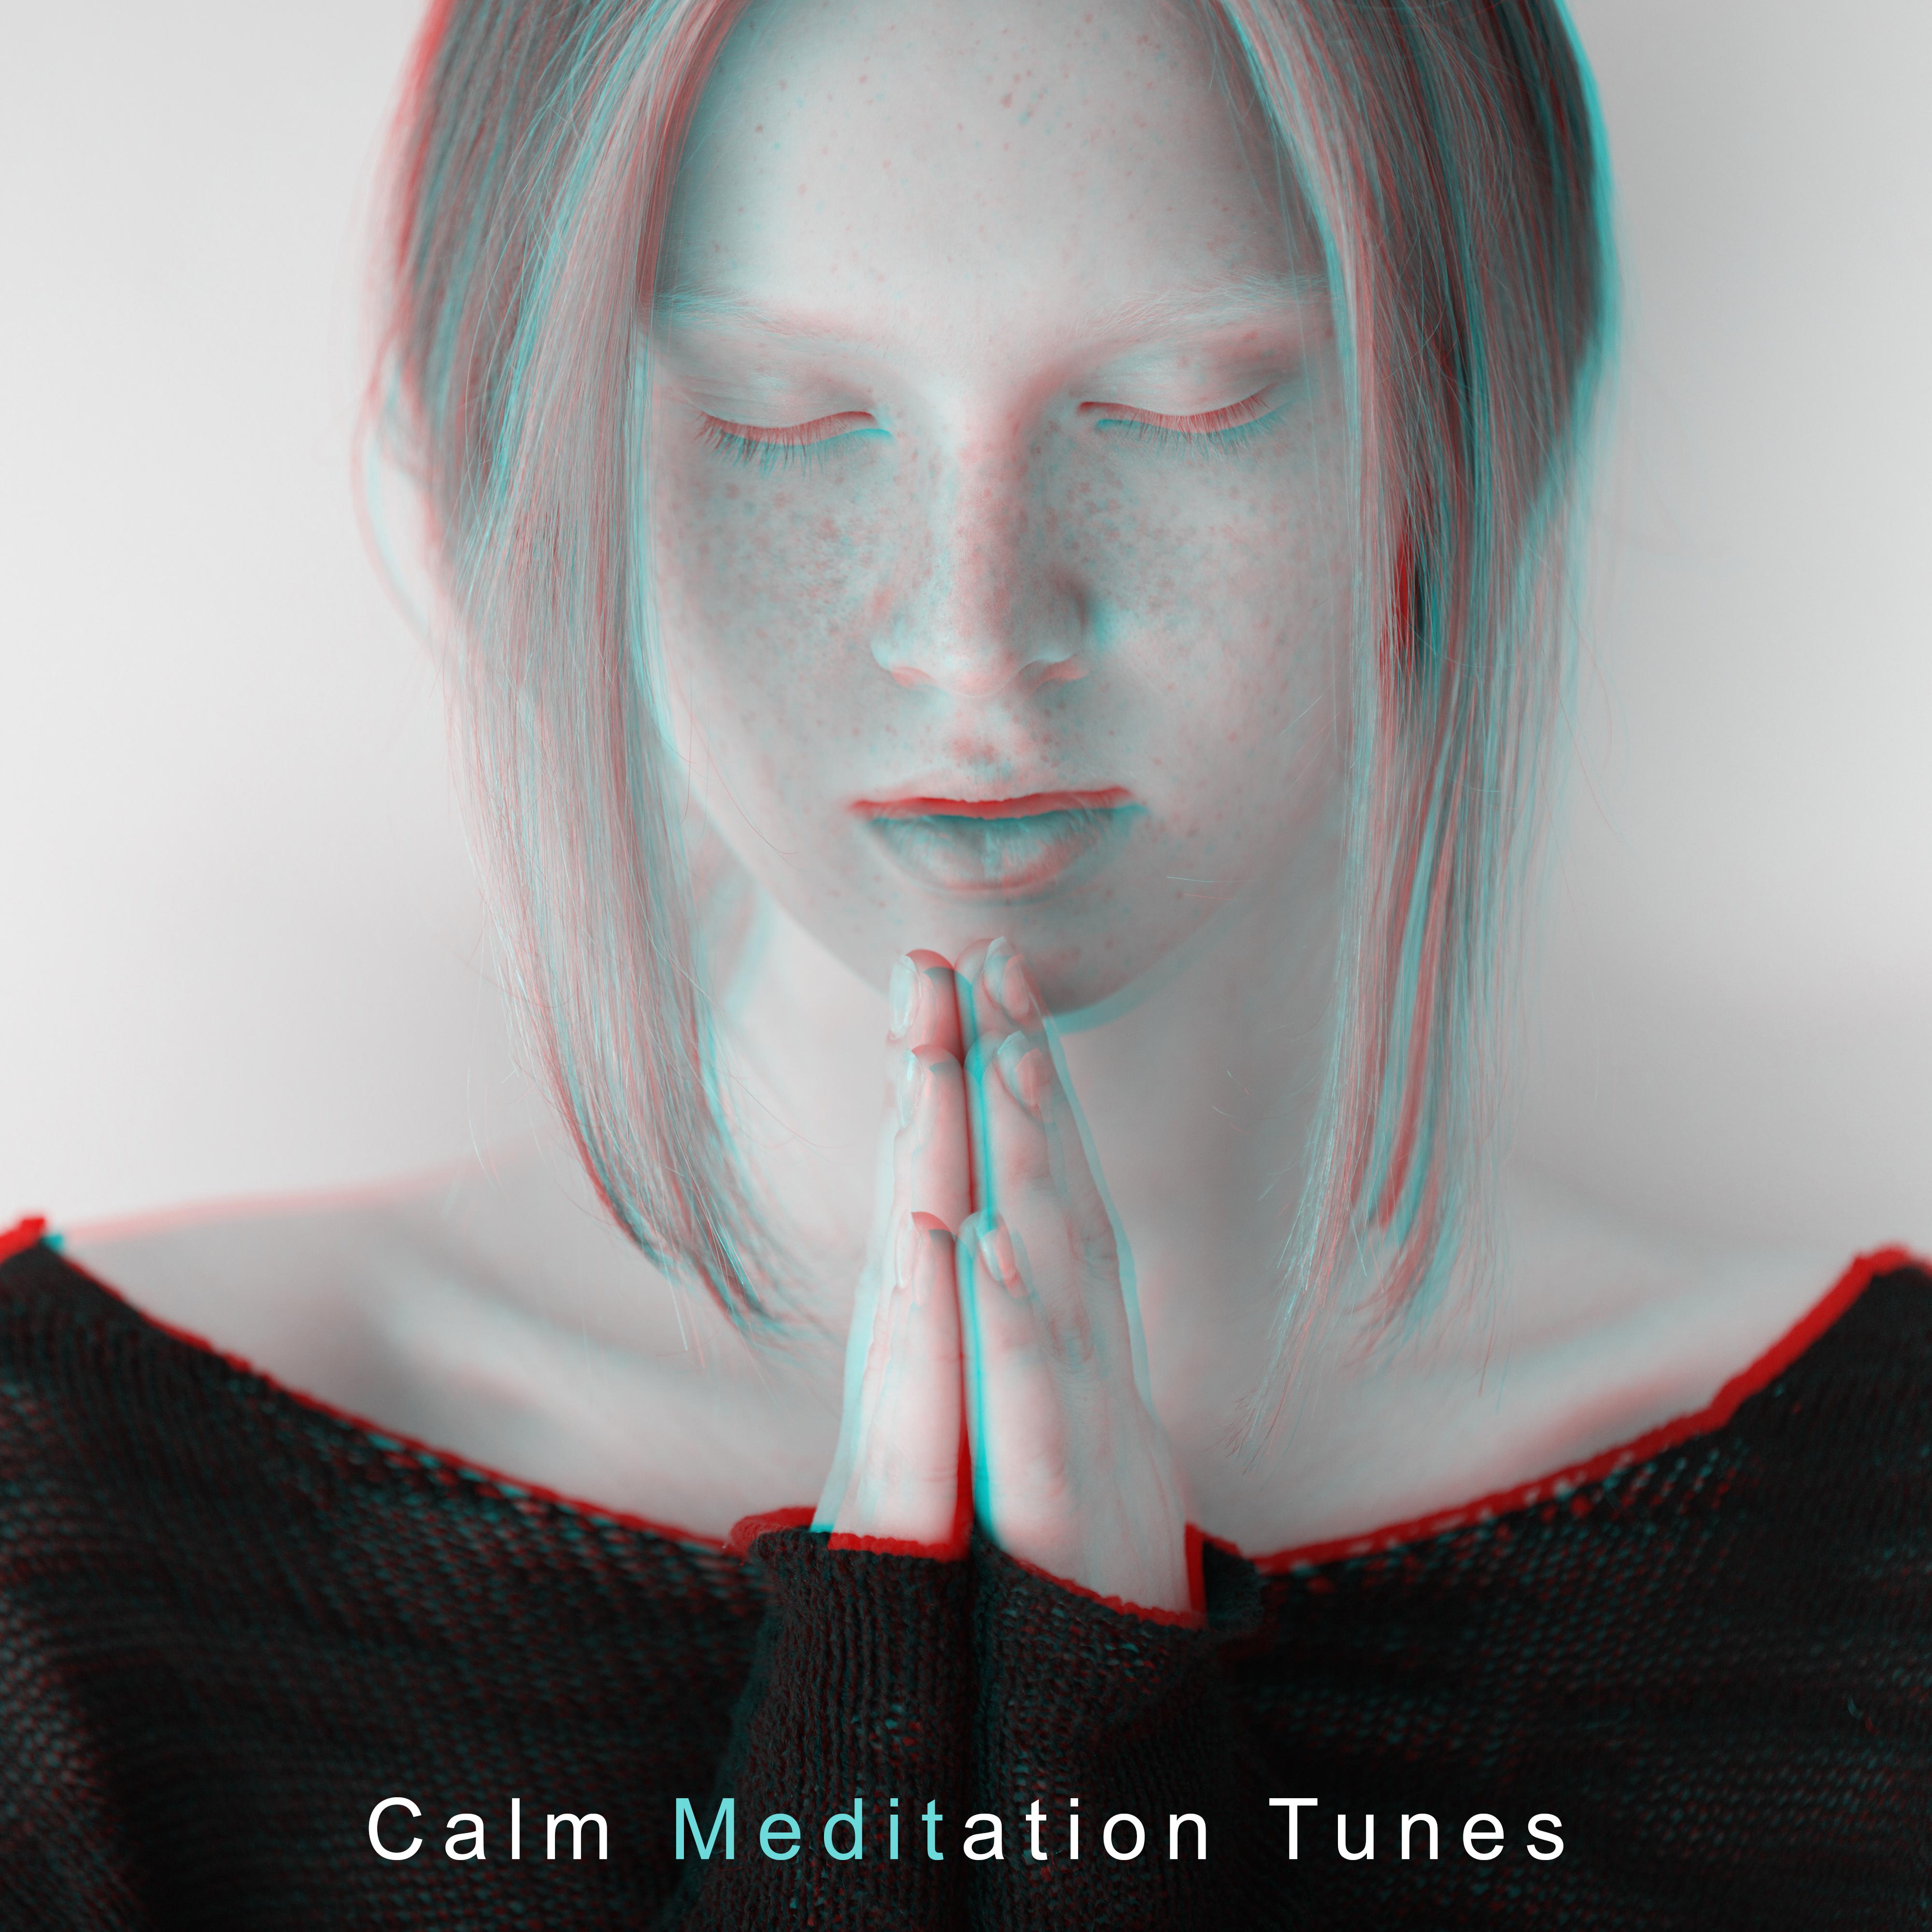 Calm Meditation Tunes: 15 Gentle New Age Songs for a Deep Meditation Practice